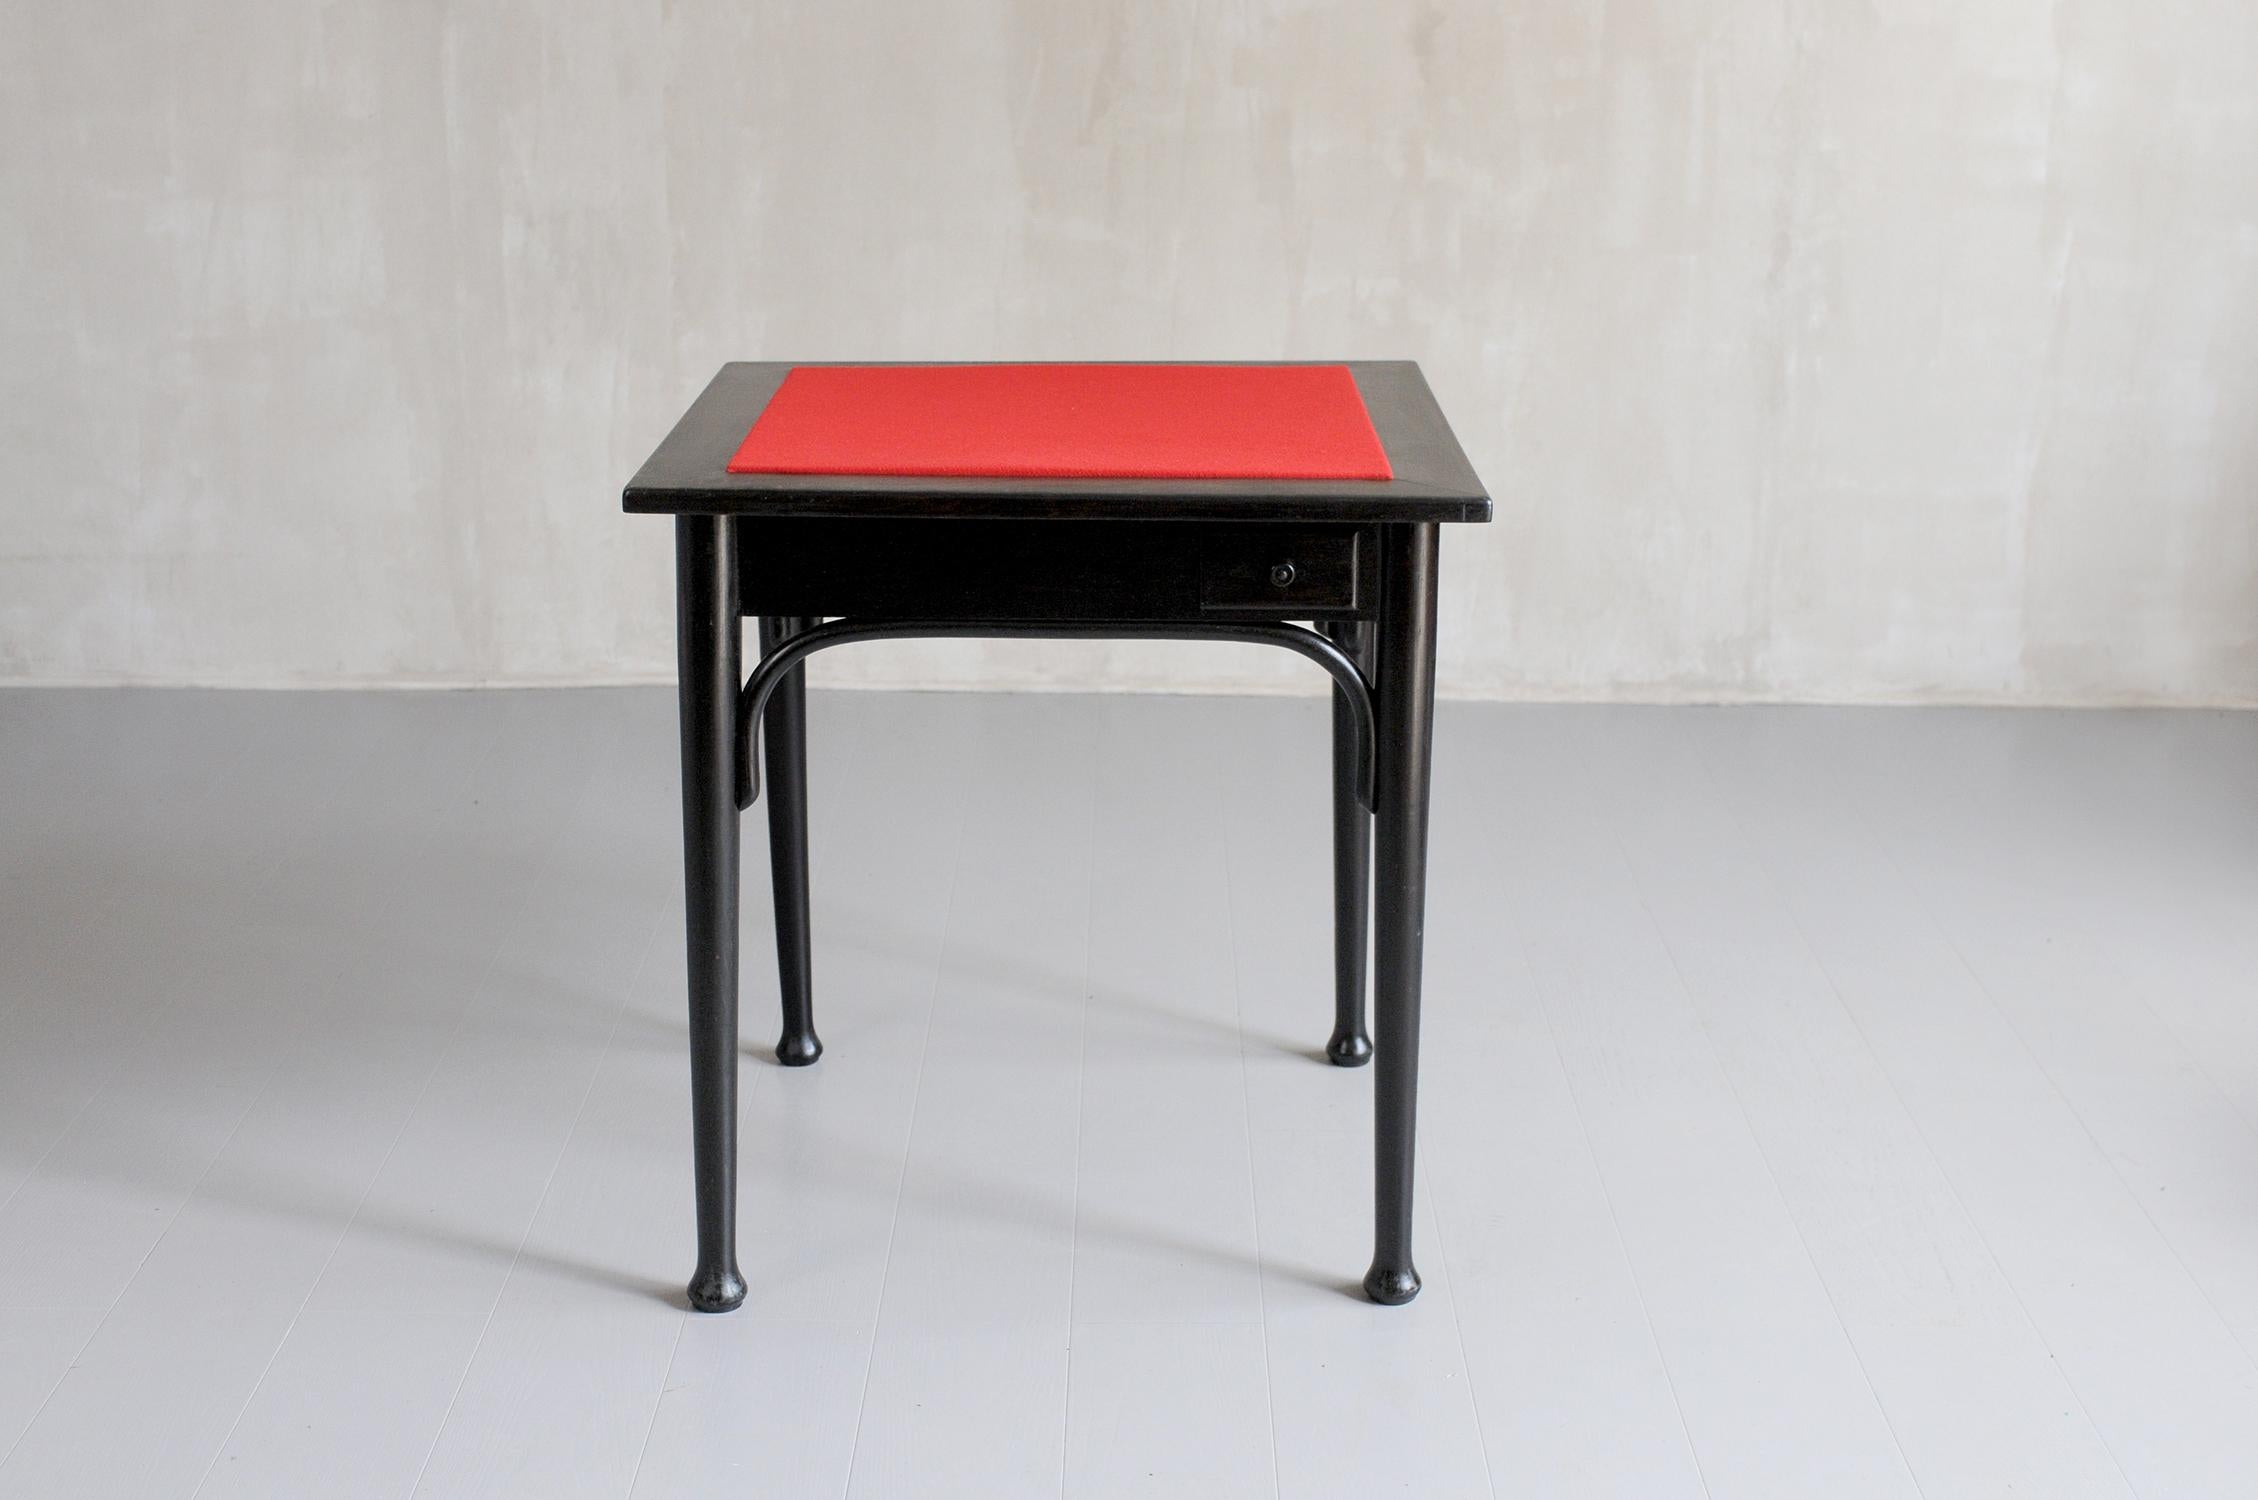 Maison Thonet, Games table in curved and blackened beech, 1940. The square top is dressed in red felt, 4 token-holder drawers are arranged on the sides.
Thonet label under the tray.